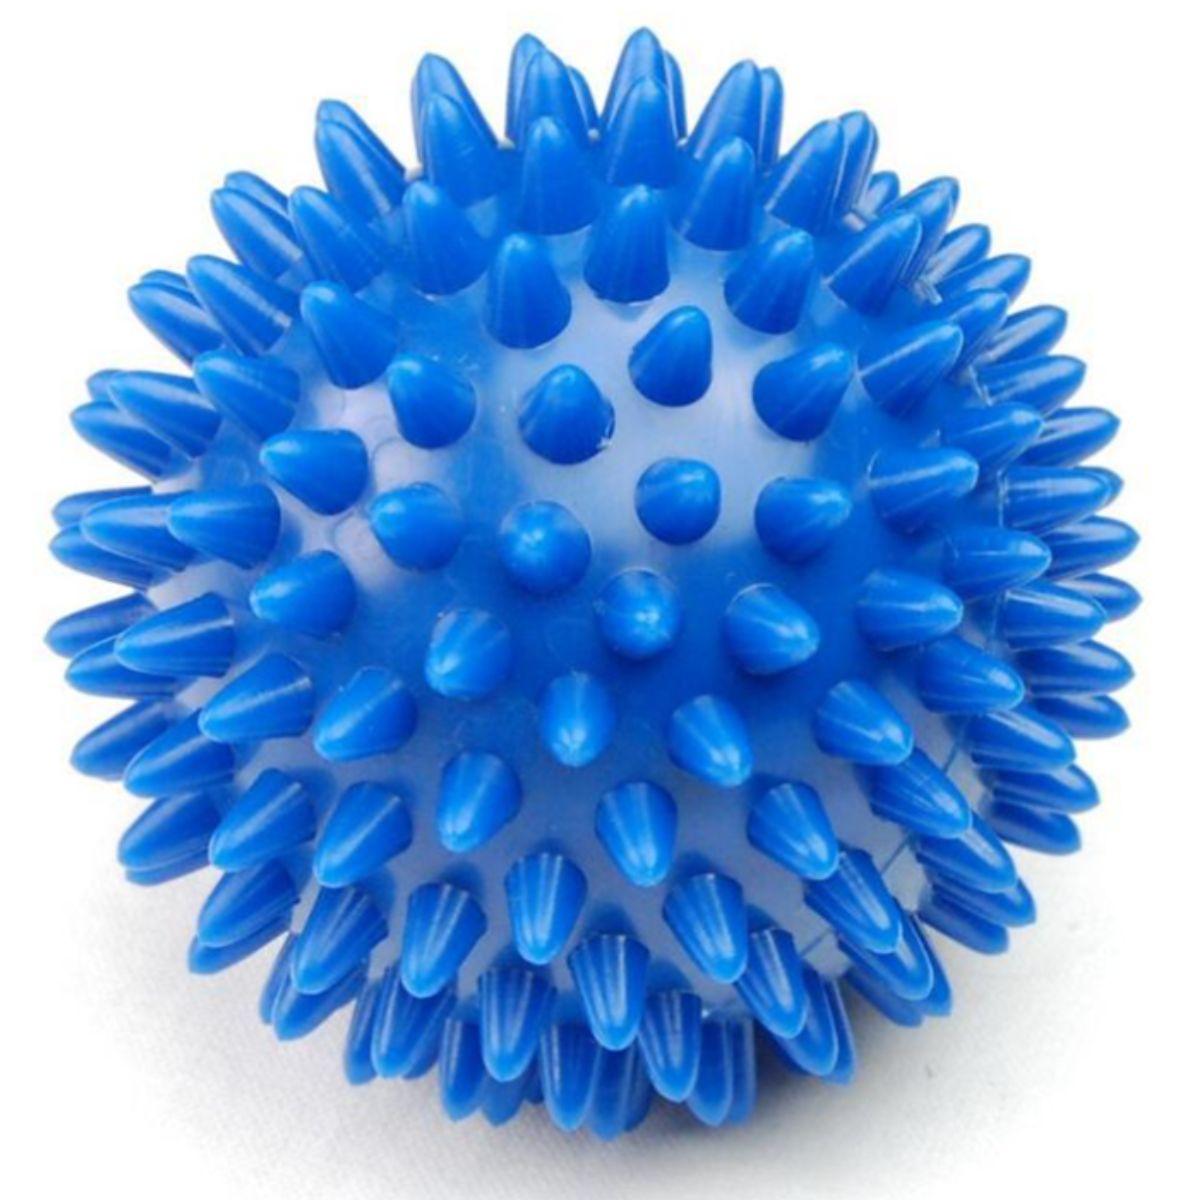 Accu Air Ball Soft (Pack of 5) - tcistarhealthproducts